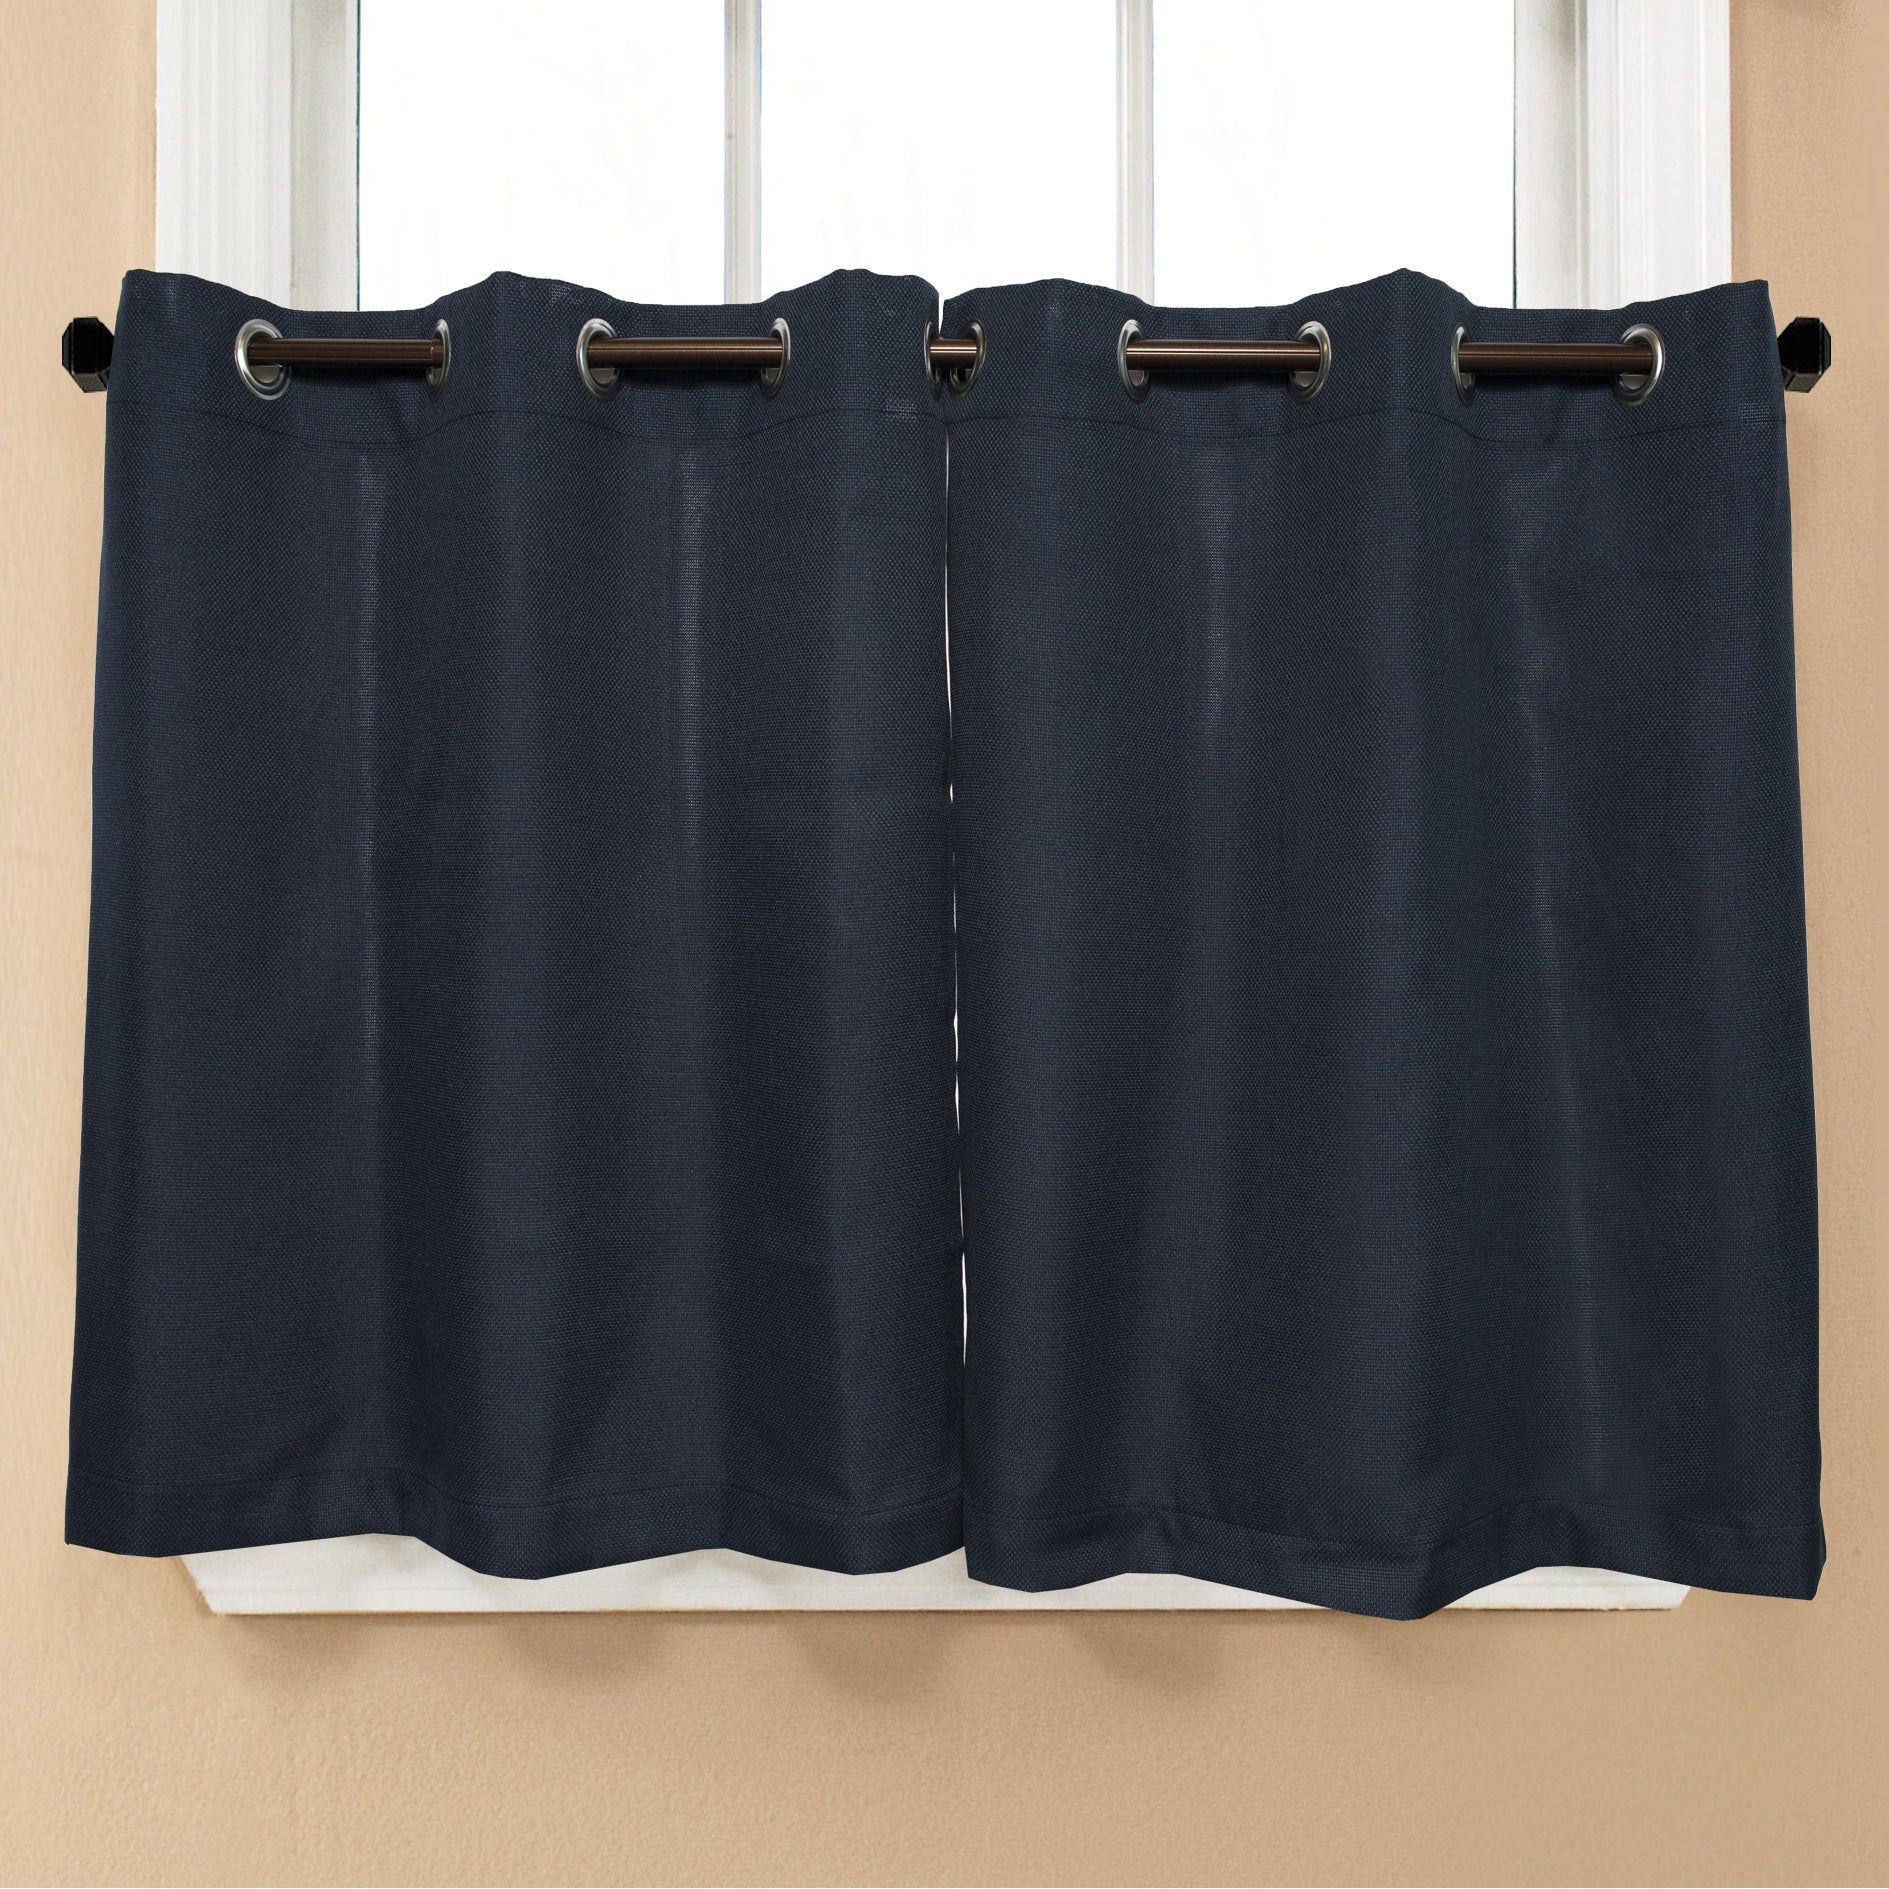 Modern Subtle Texture Solid Navy Kitchen Curtain Parts With Grommets  Tier  And Valance Options With Regard To Modern Subtle Texture Solid Red Kitchen Curtains (View 7 of 20)